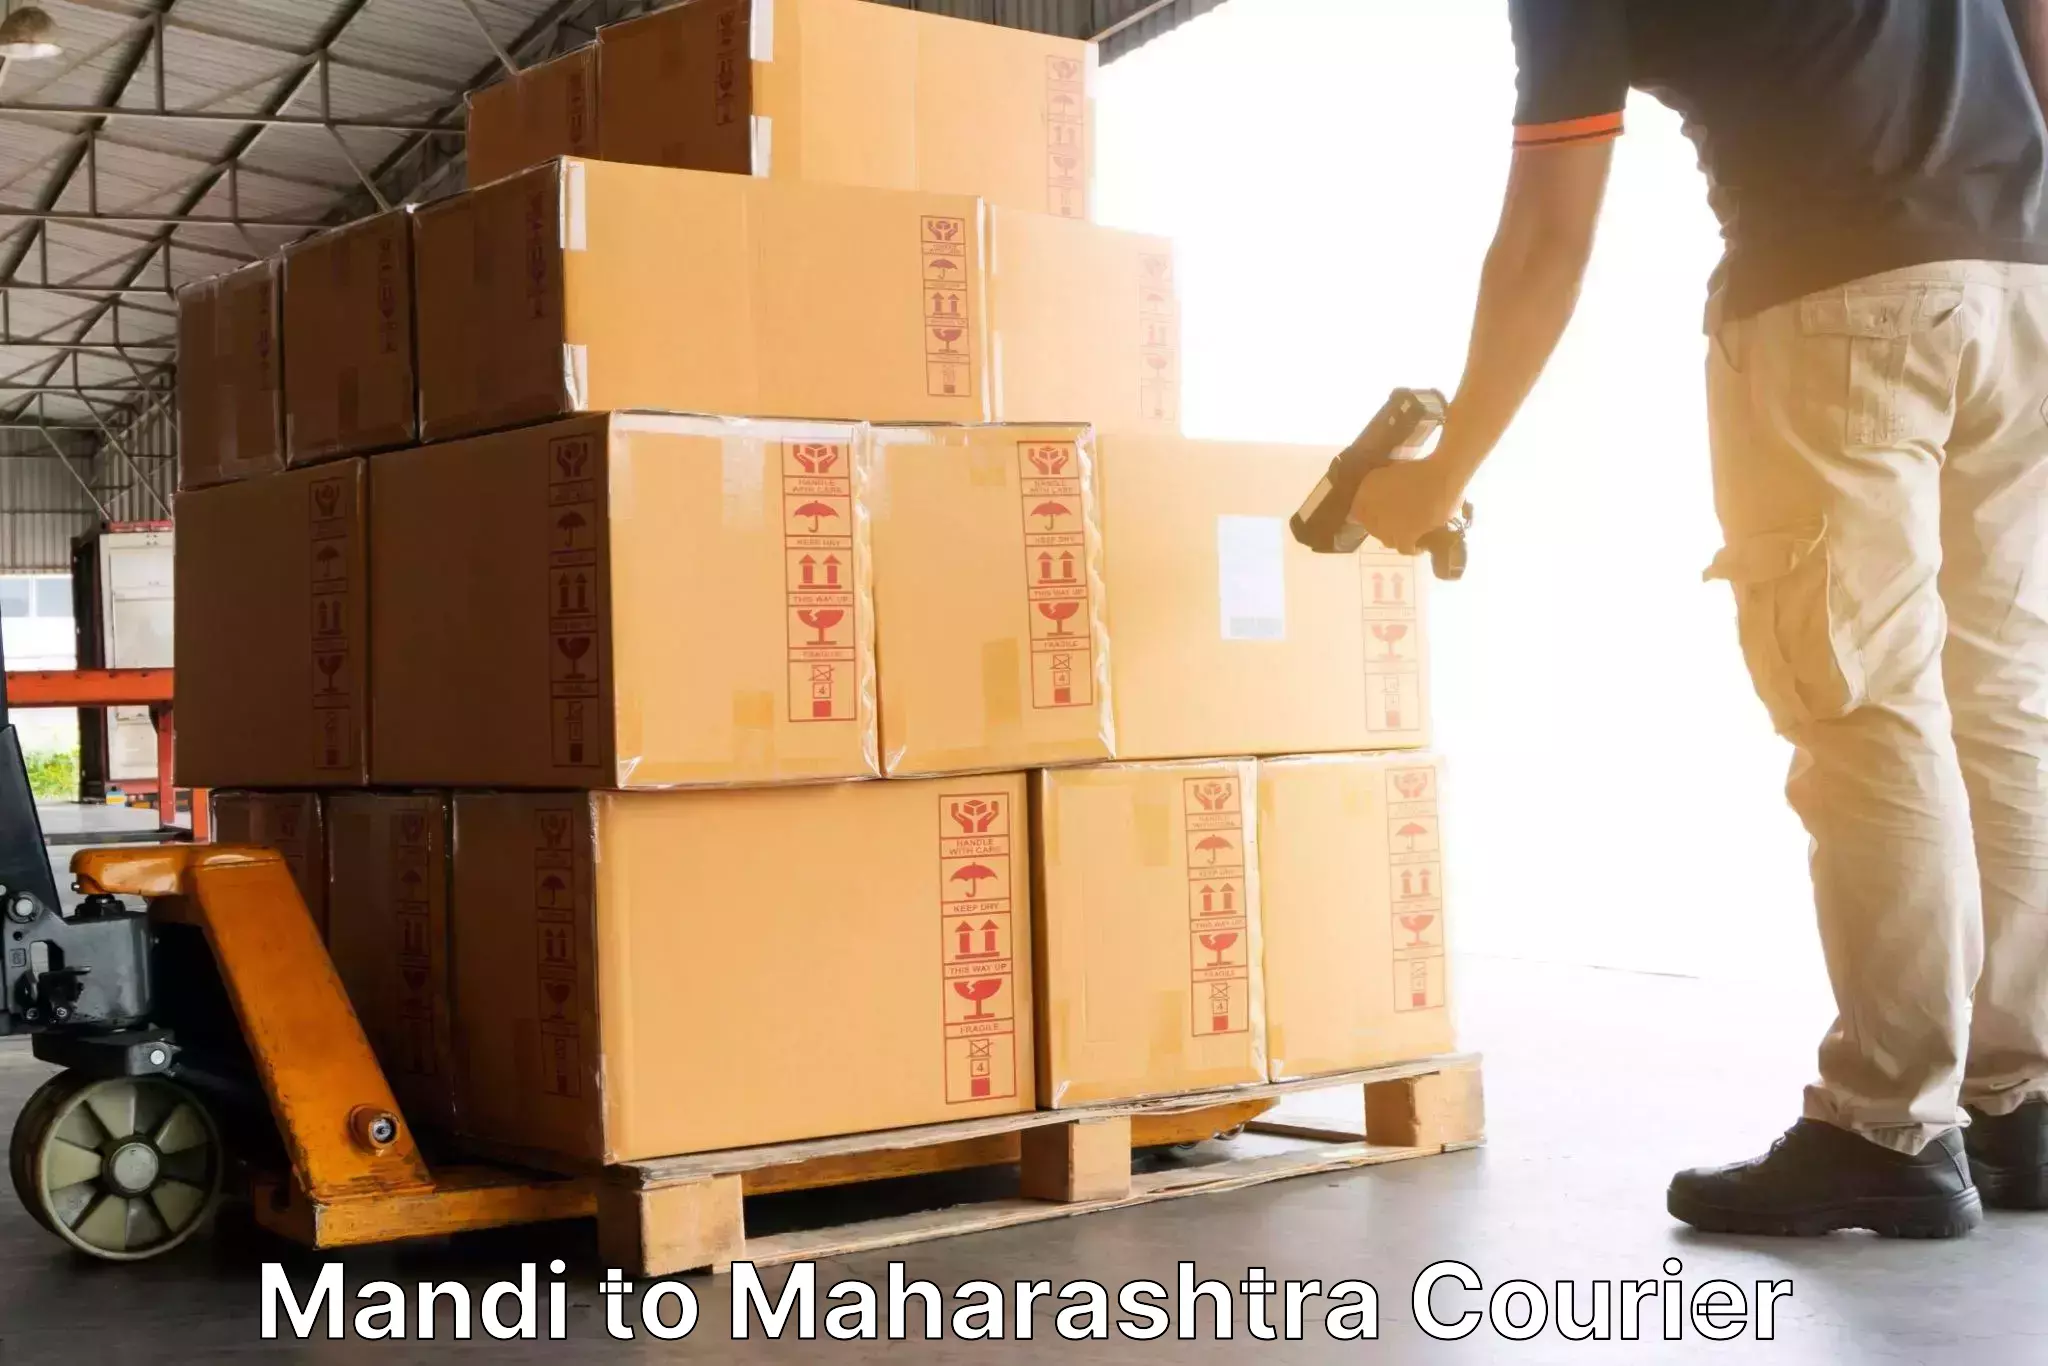 Trackable shipping service in Mandi to Sangli